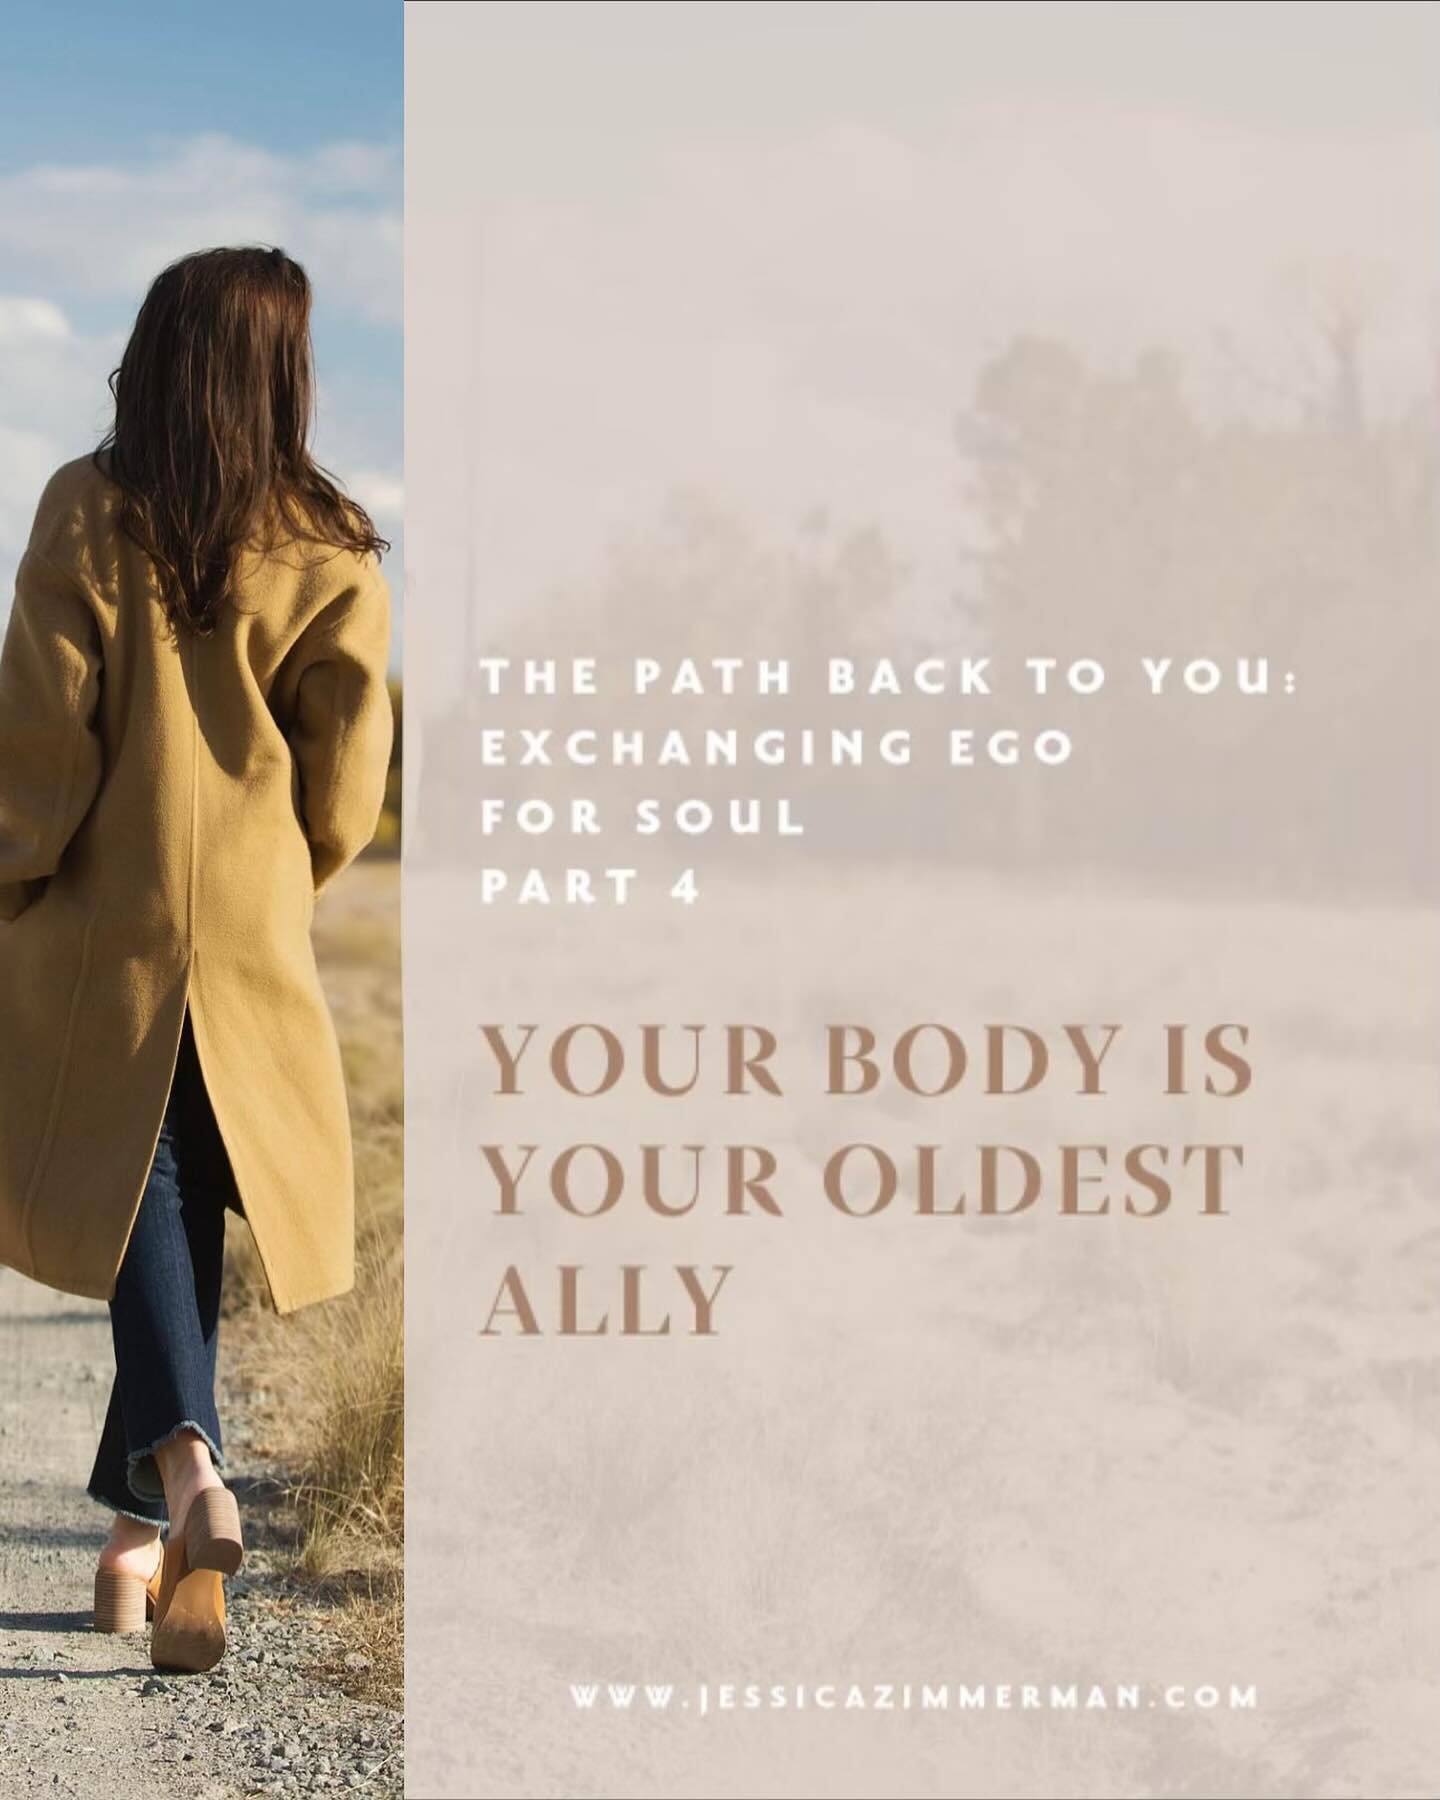 When we learn to honor our souls, the body can be one of the greatest sources of wisdom, working in tandem with our souls to direct us and lead us on the path back to our true selves.

Our bodies aren&rsquo;t evil. They&rsquo;re not bad. There&rsquo;